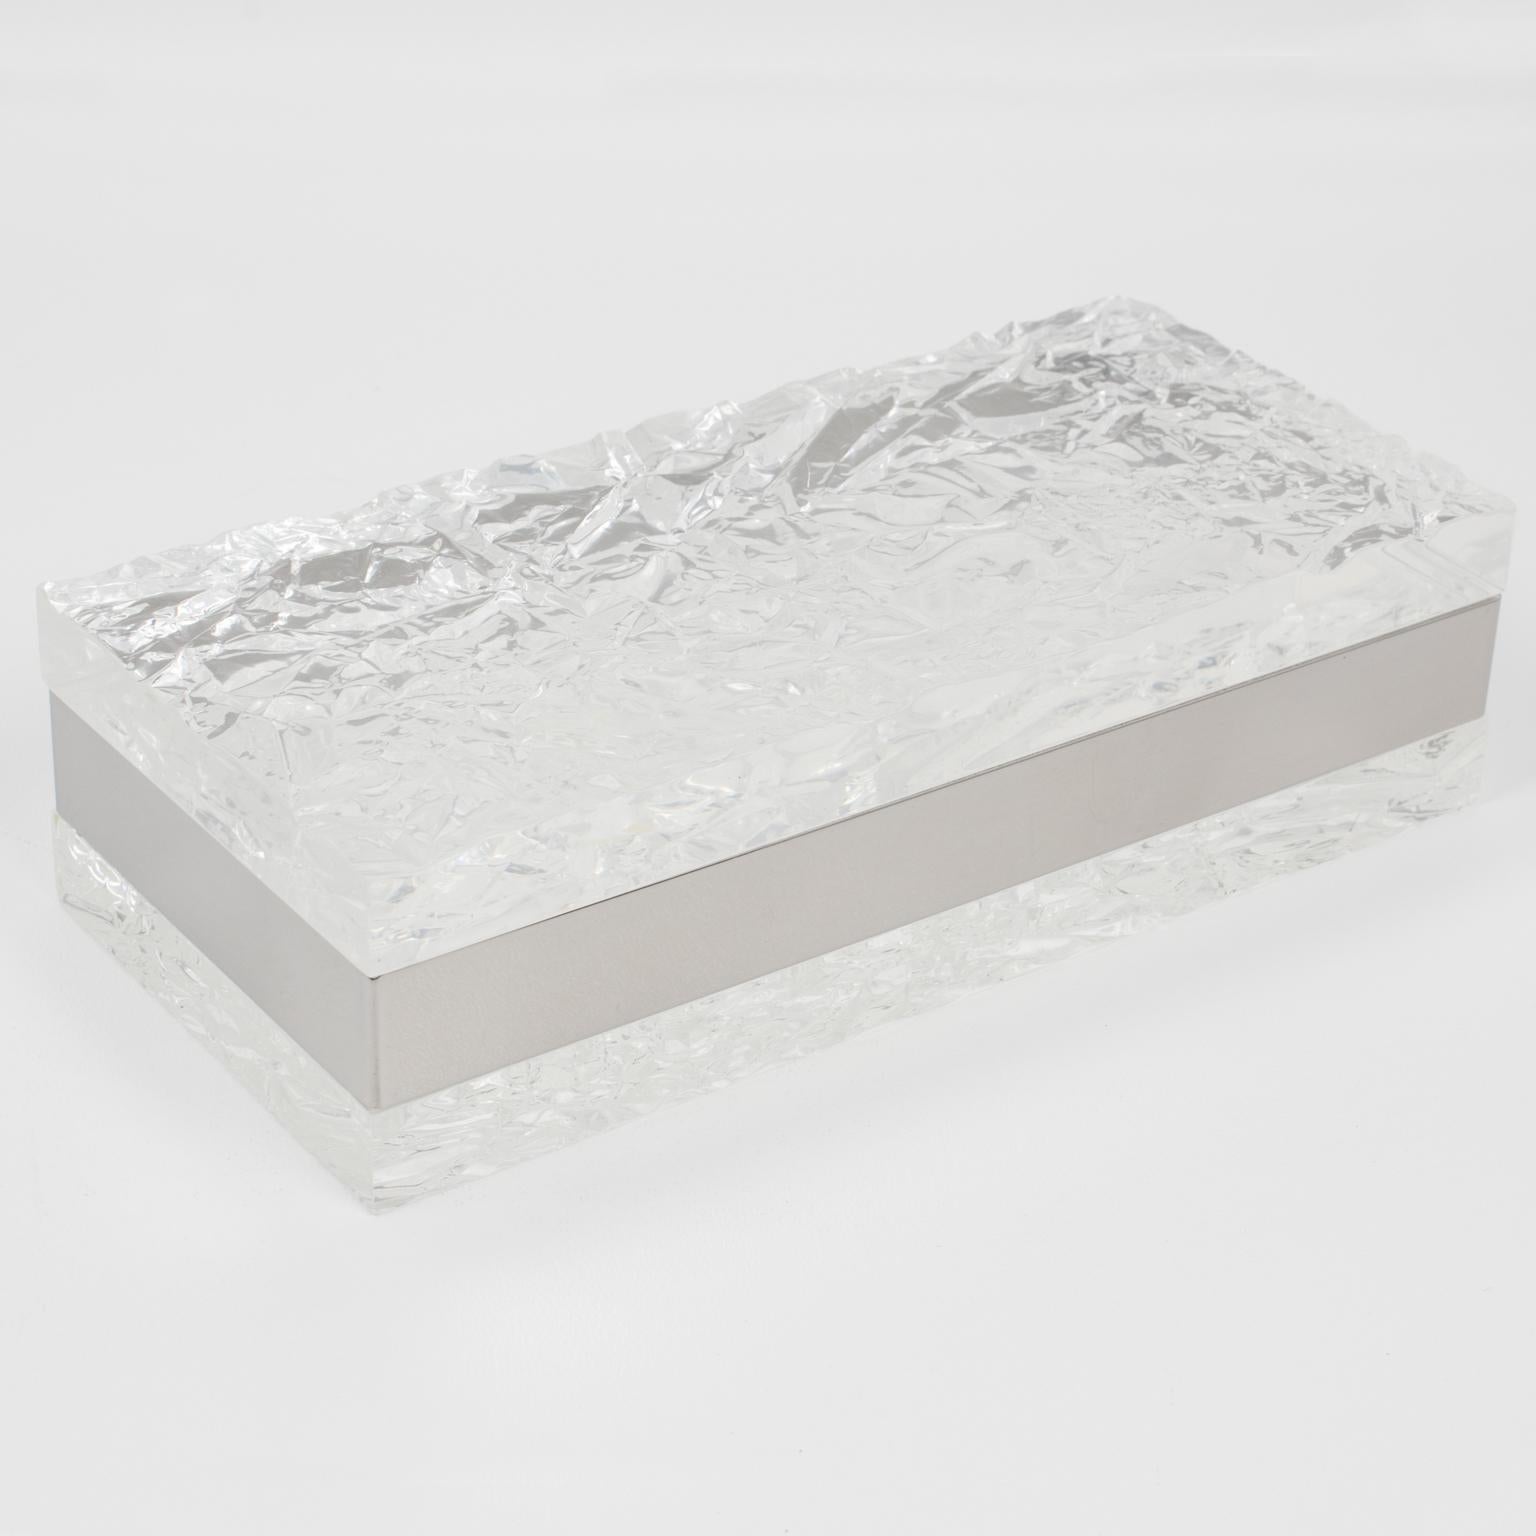 Metal Willy Rizzo Style Ice Effect Lucite and Chrome Decorative Box, 1970s For Sale